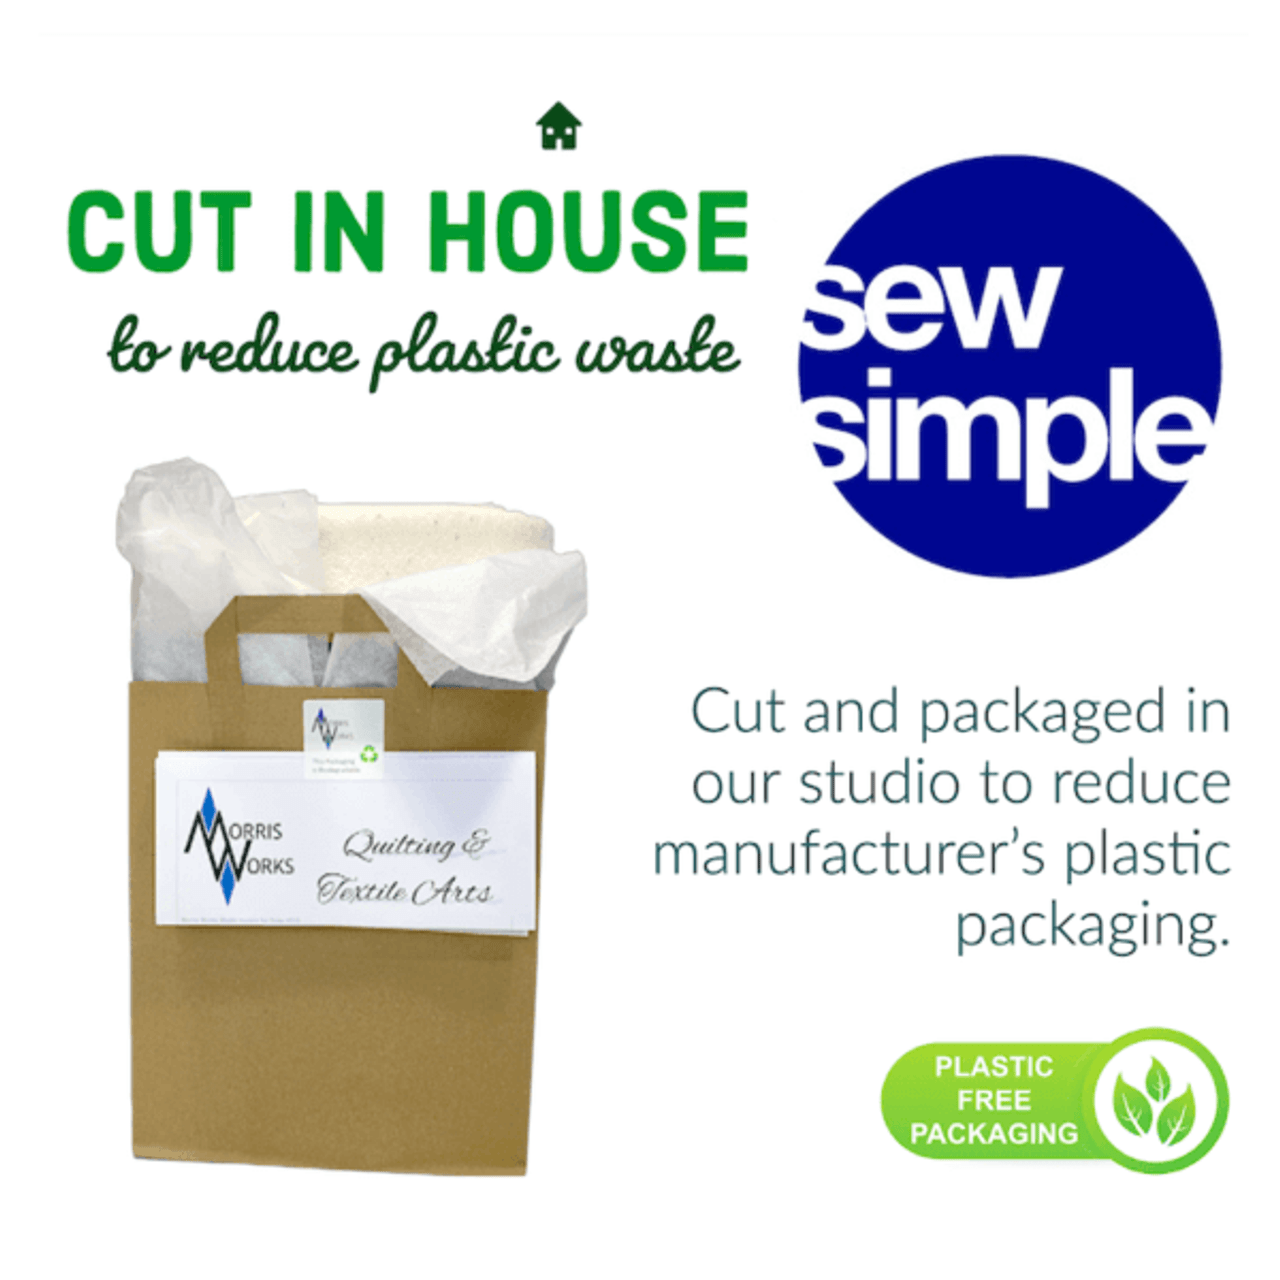 All Sew Simple wadding is cut in house to reduce plastic packaging